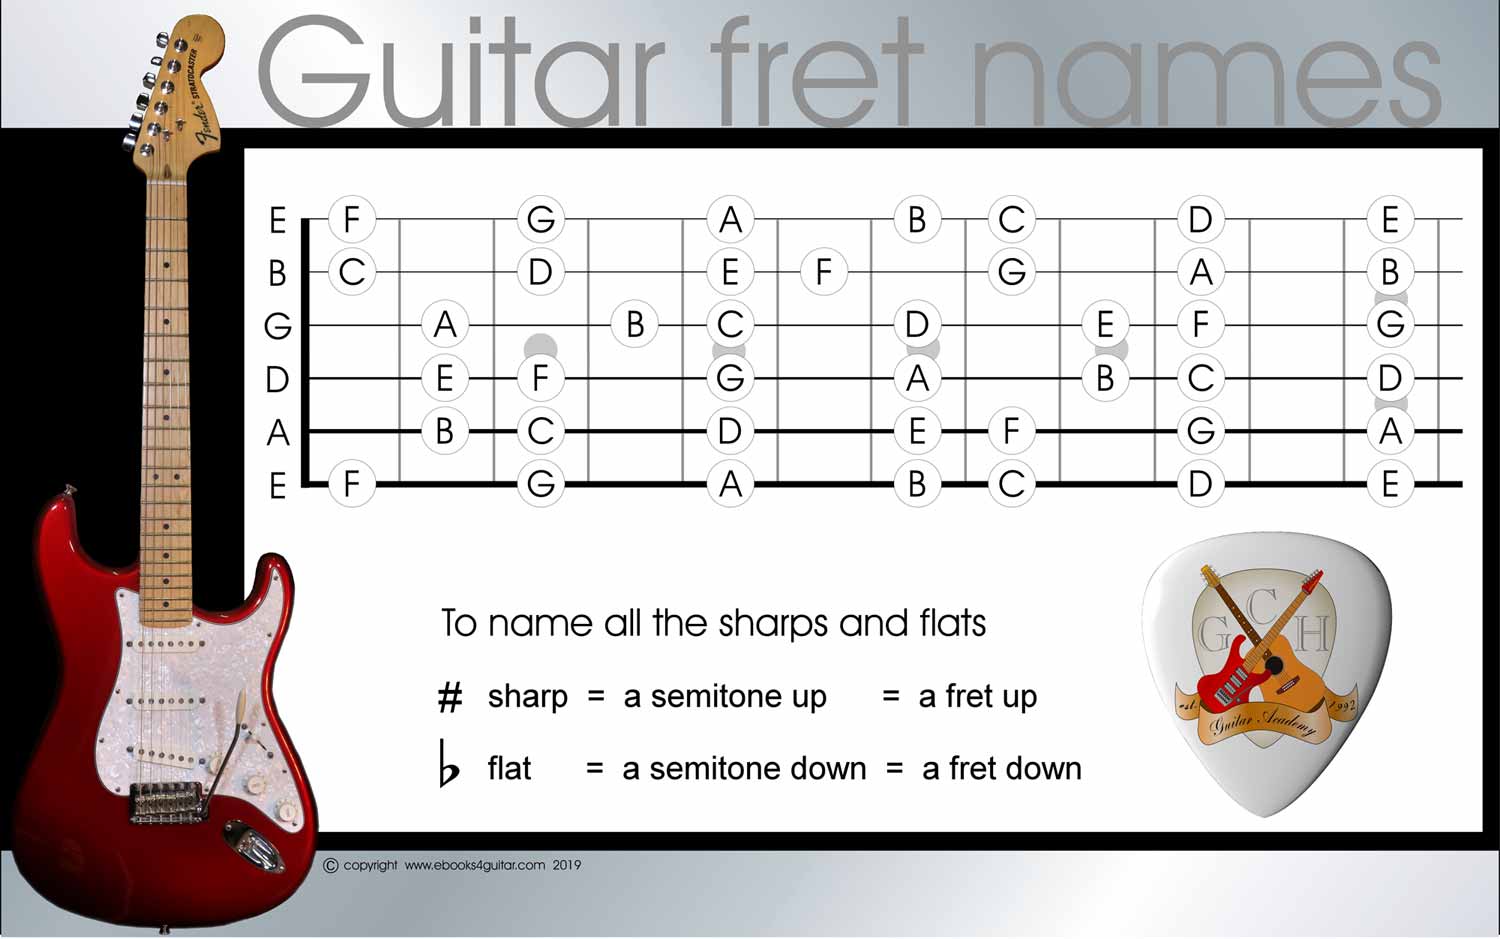 Learn the frets on a guitar in easy steps for beginners